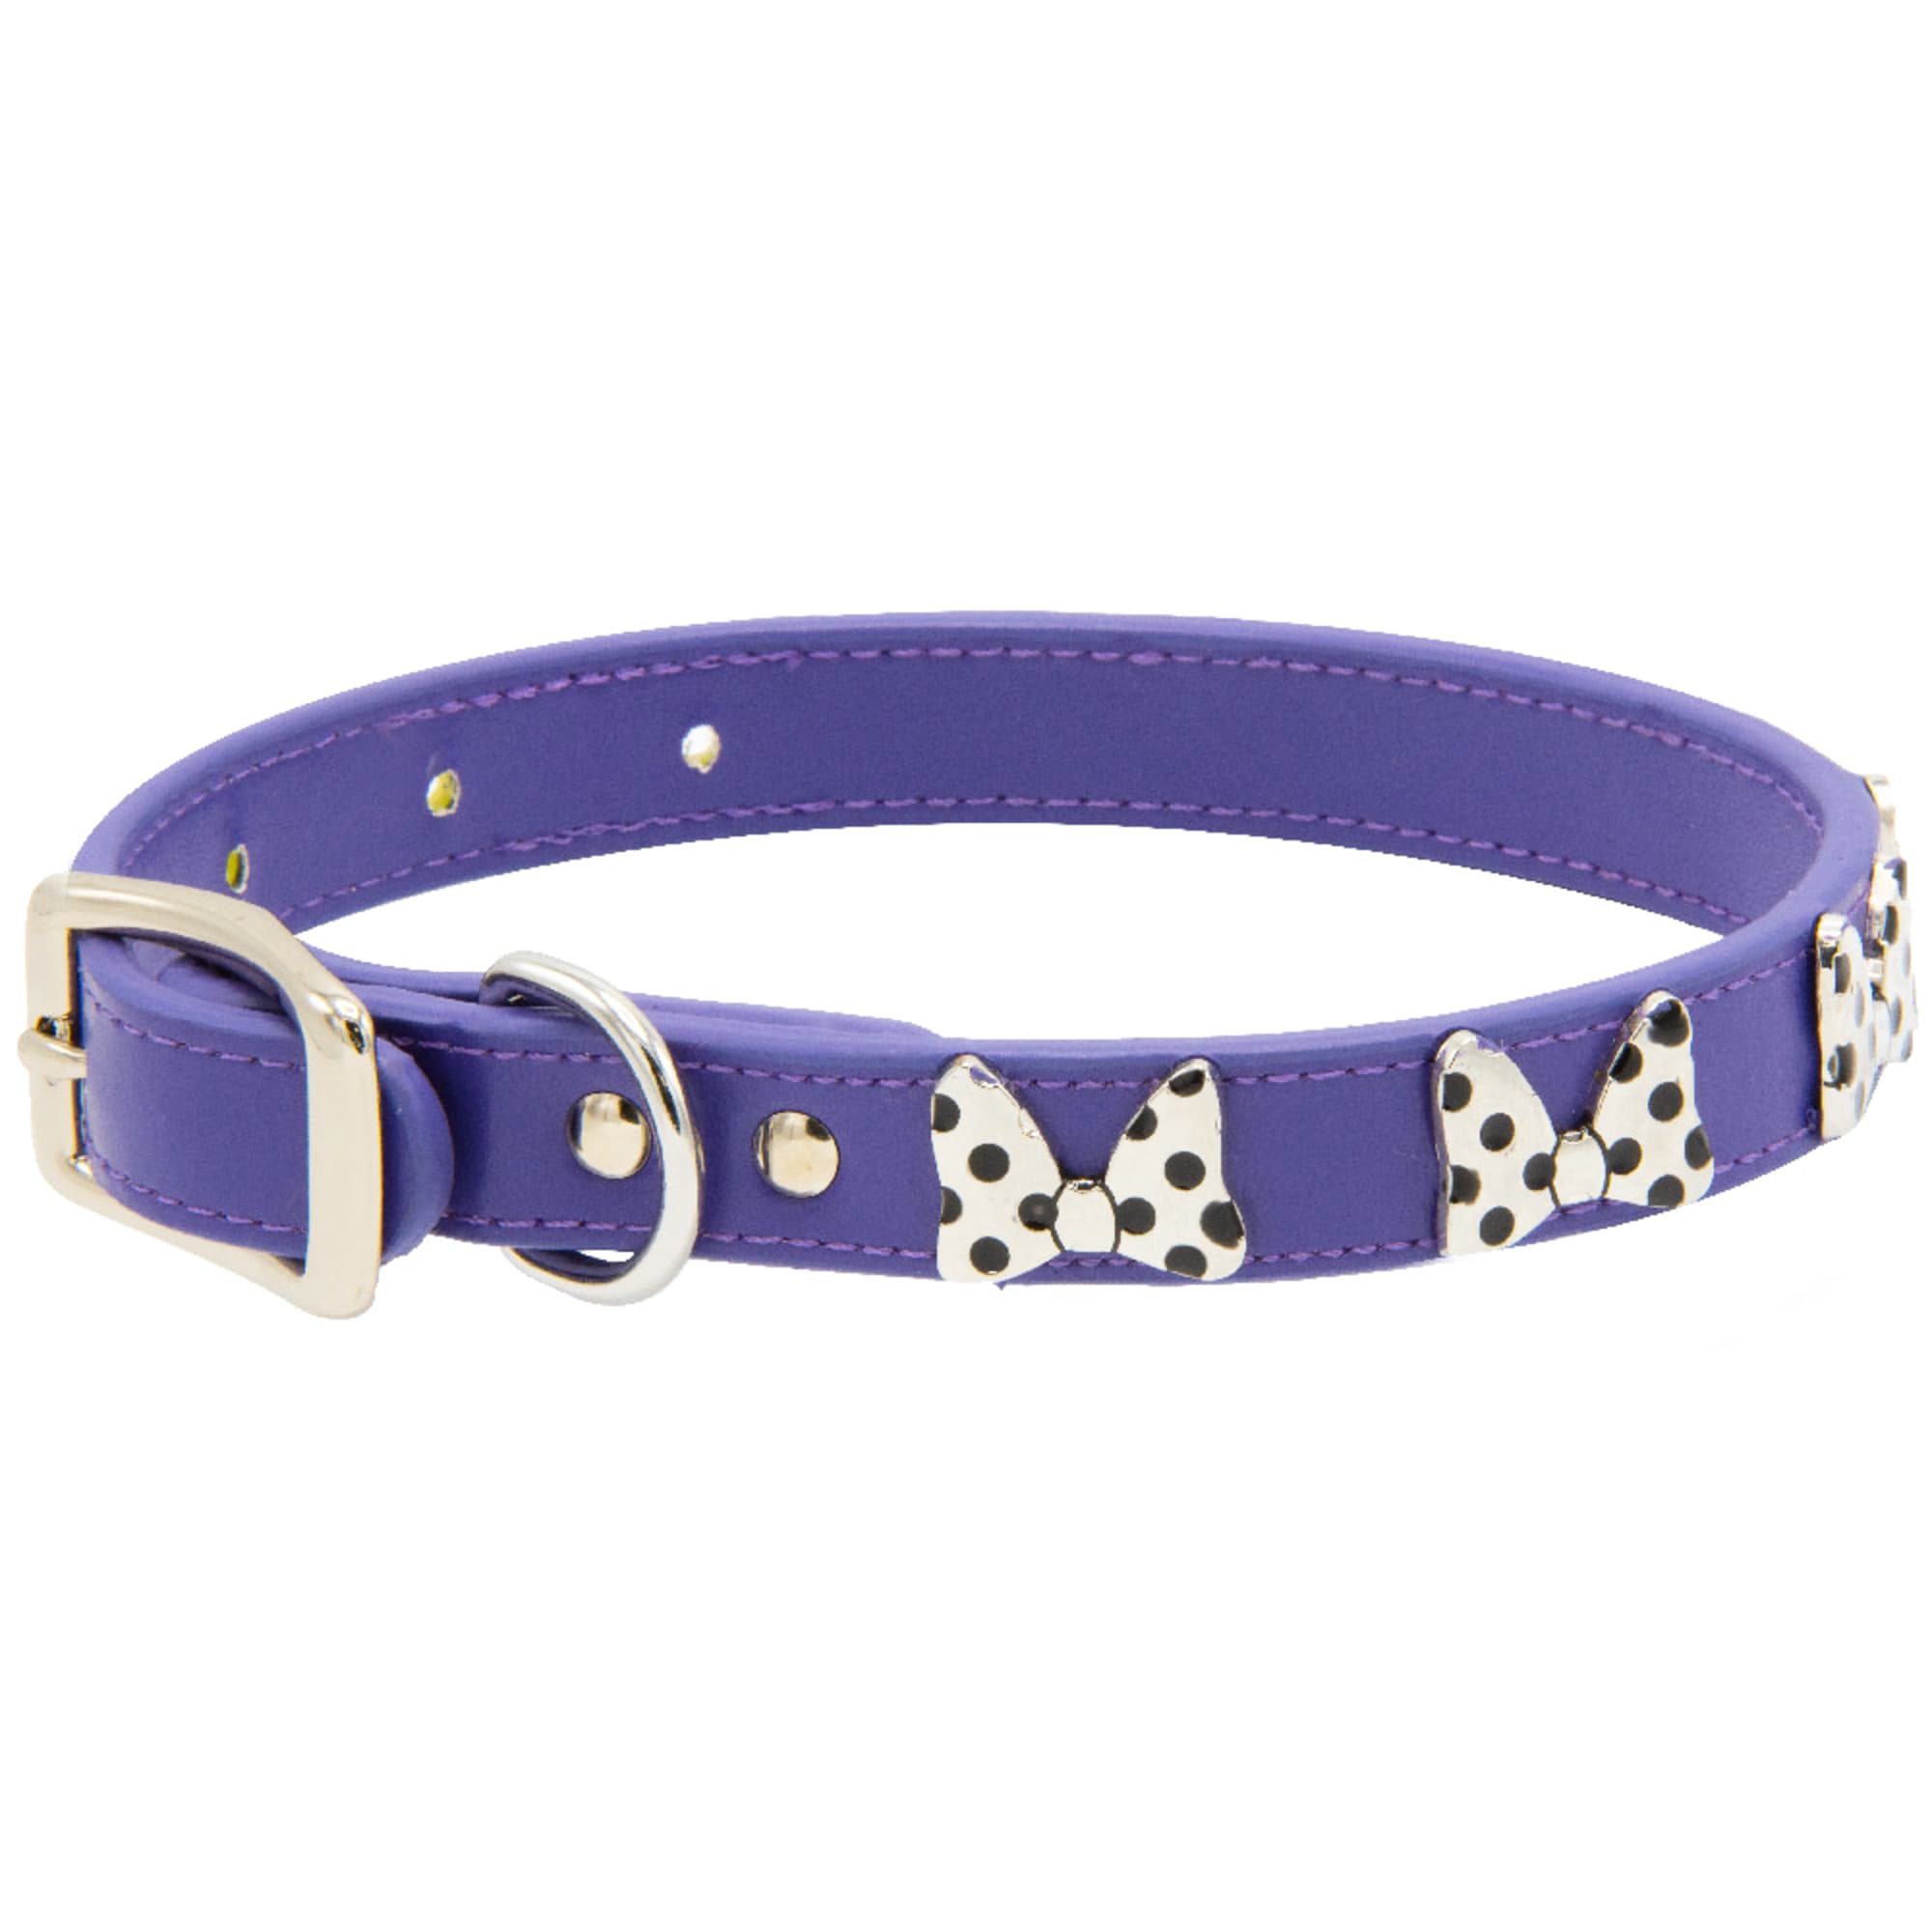 Small Buckle-Down Plastic Clip Collar Fits 6-9 Neck Minnie Mouse Expressions Polka Dot Pink/White 1/2 Wide 